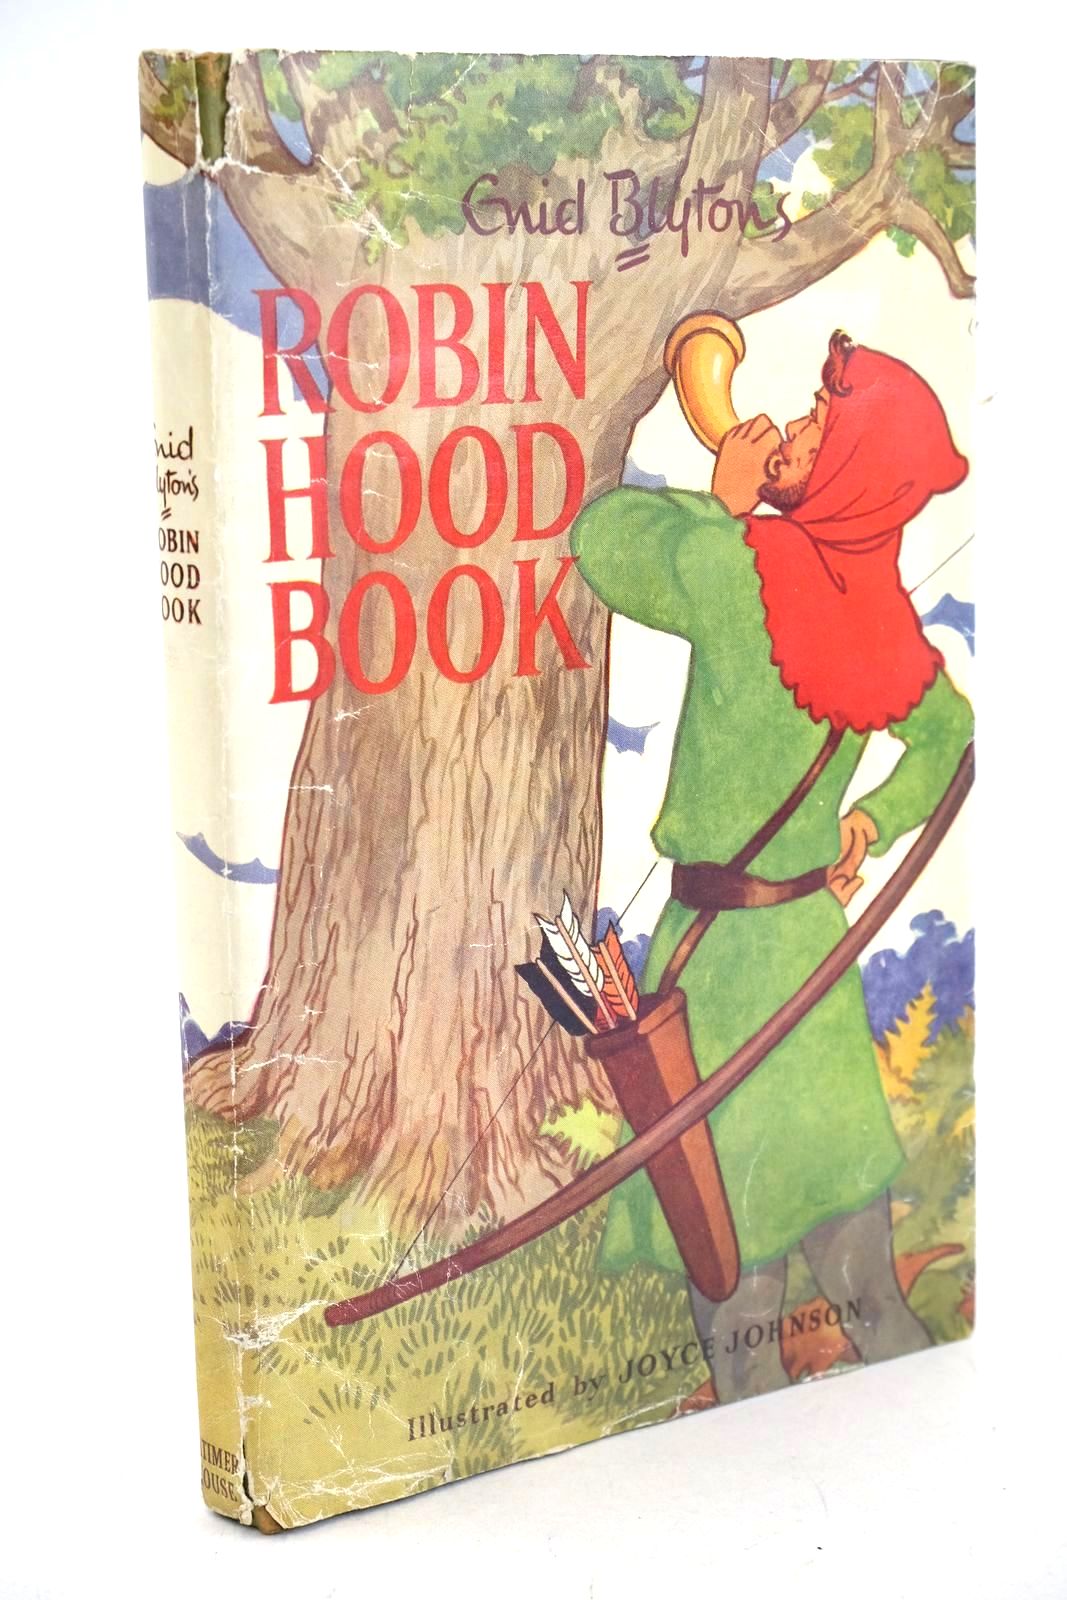 Photo of ENID BLYTON'S ROBIN HOOD BOOK written by Blyton, Enid illustrated by Johnson, Joyce published by Latimer House Ltd. (STOCK CODE: 1326783)  for sale by Stella & Rose's Books